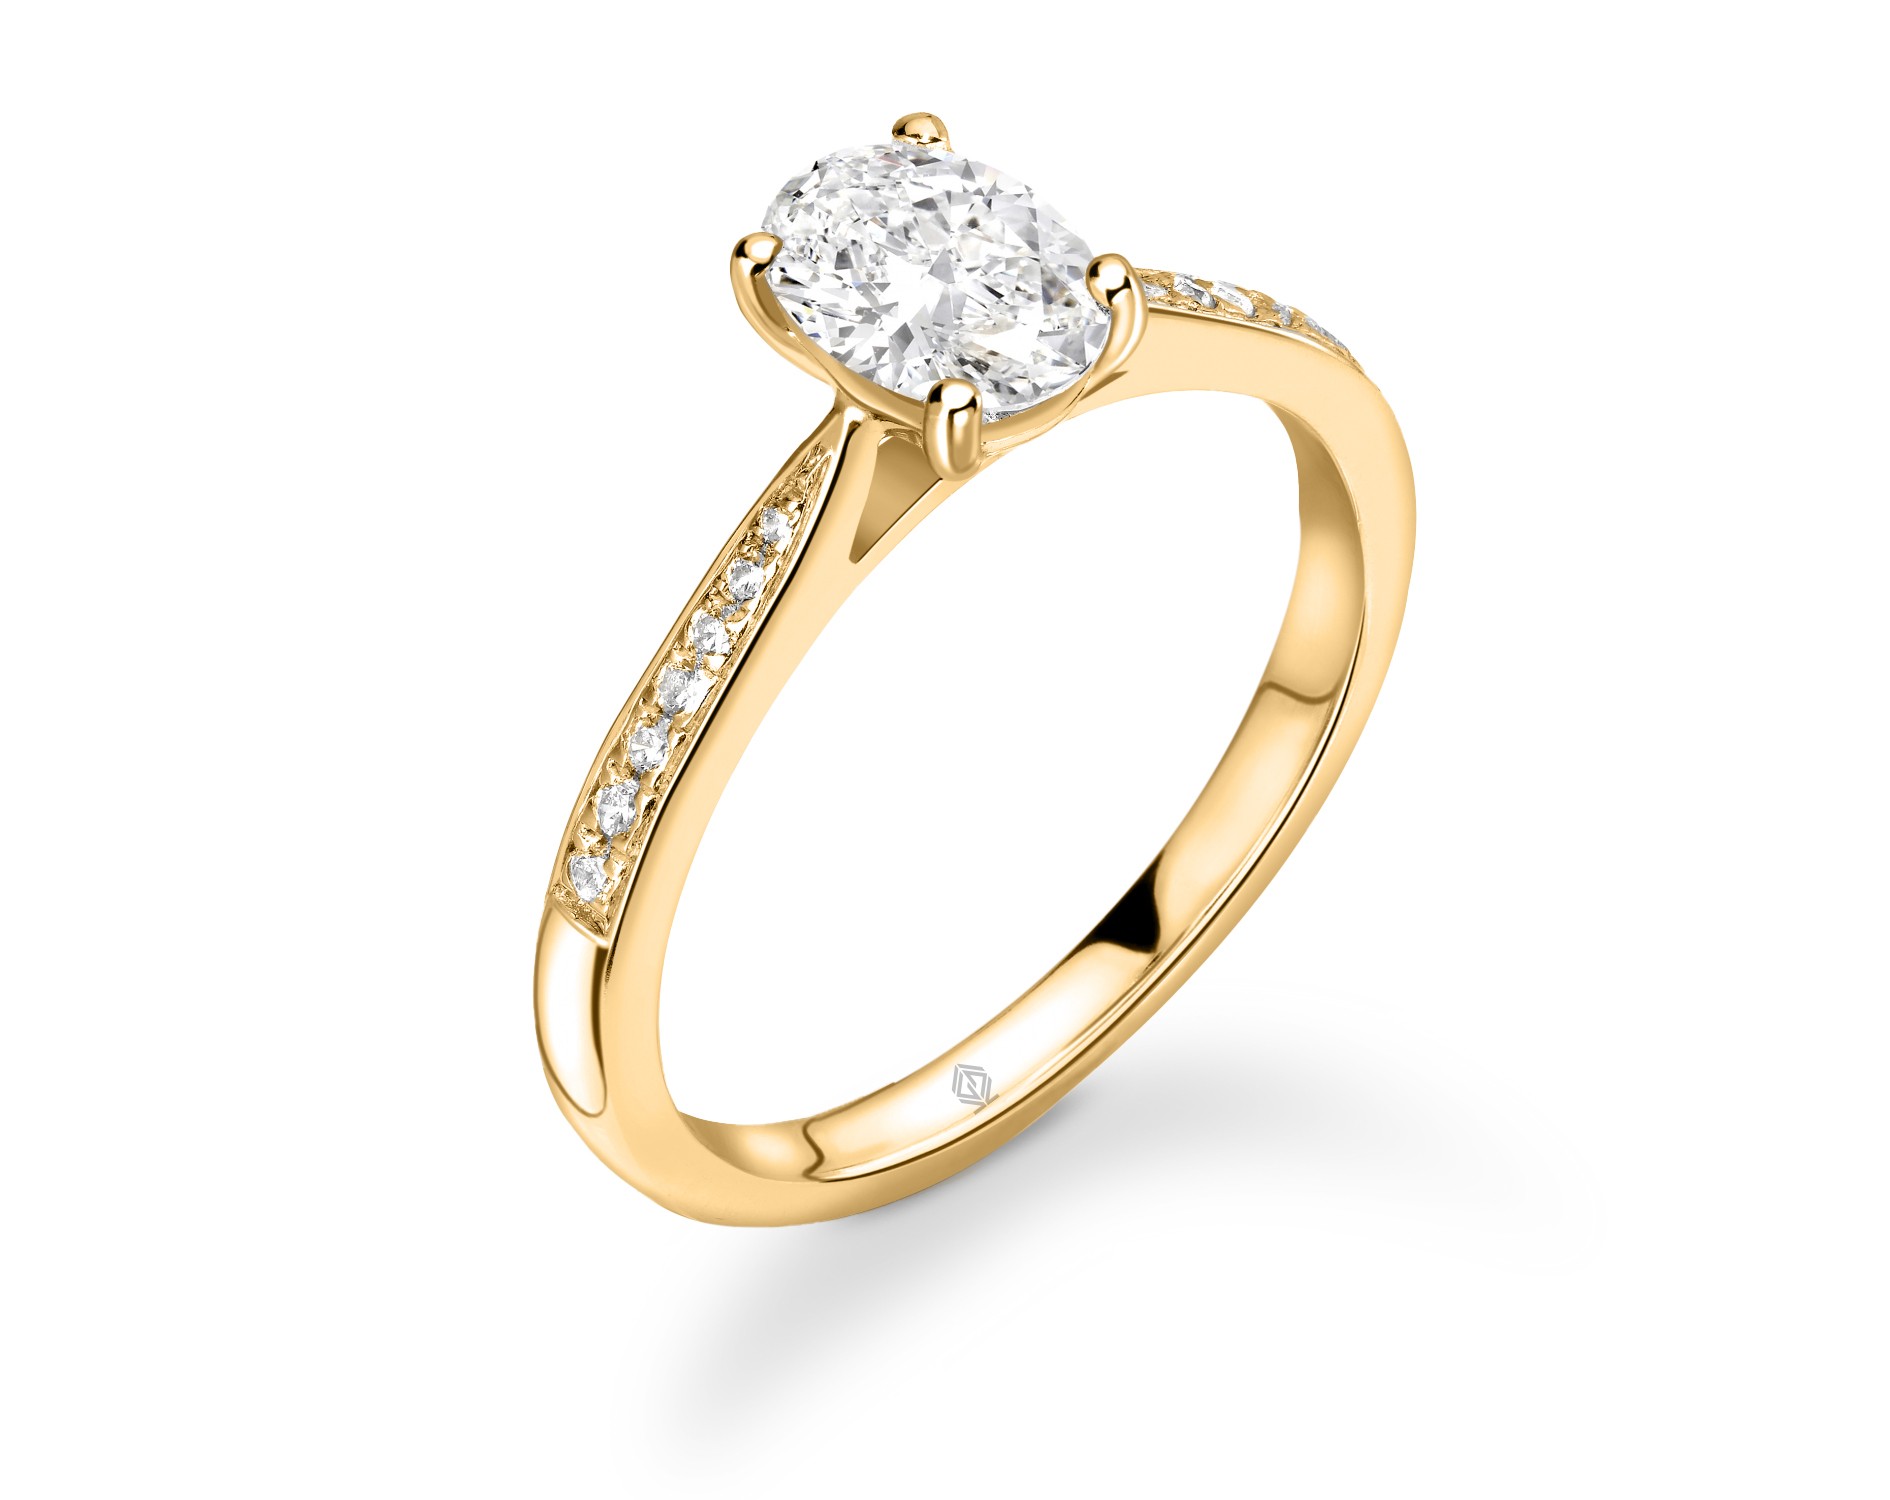 18K YELLOW GOLD OVAL CUT DIAMOND ENGAGEMENT RING WITH SIDE STONES CHANNEL SET